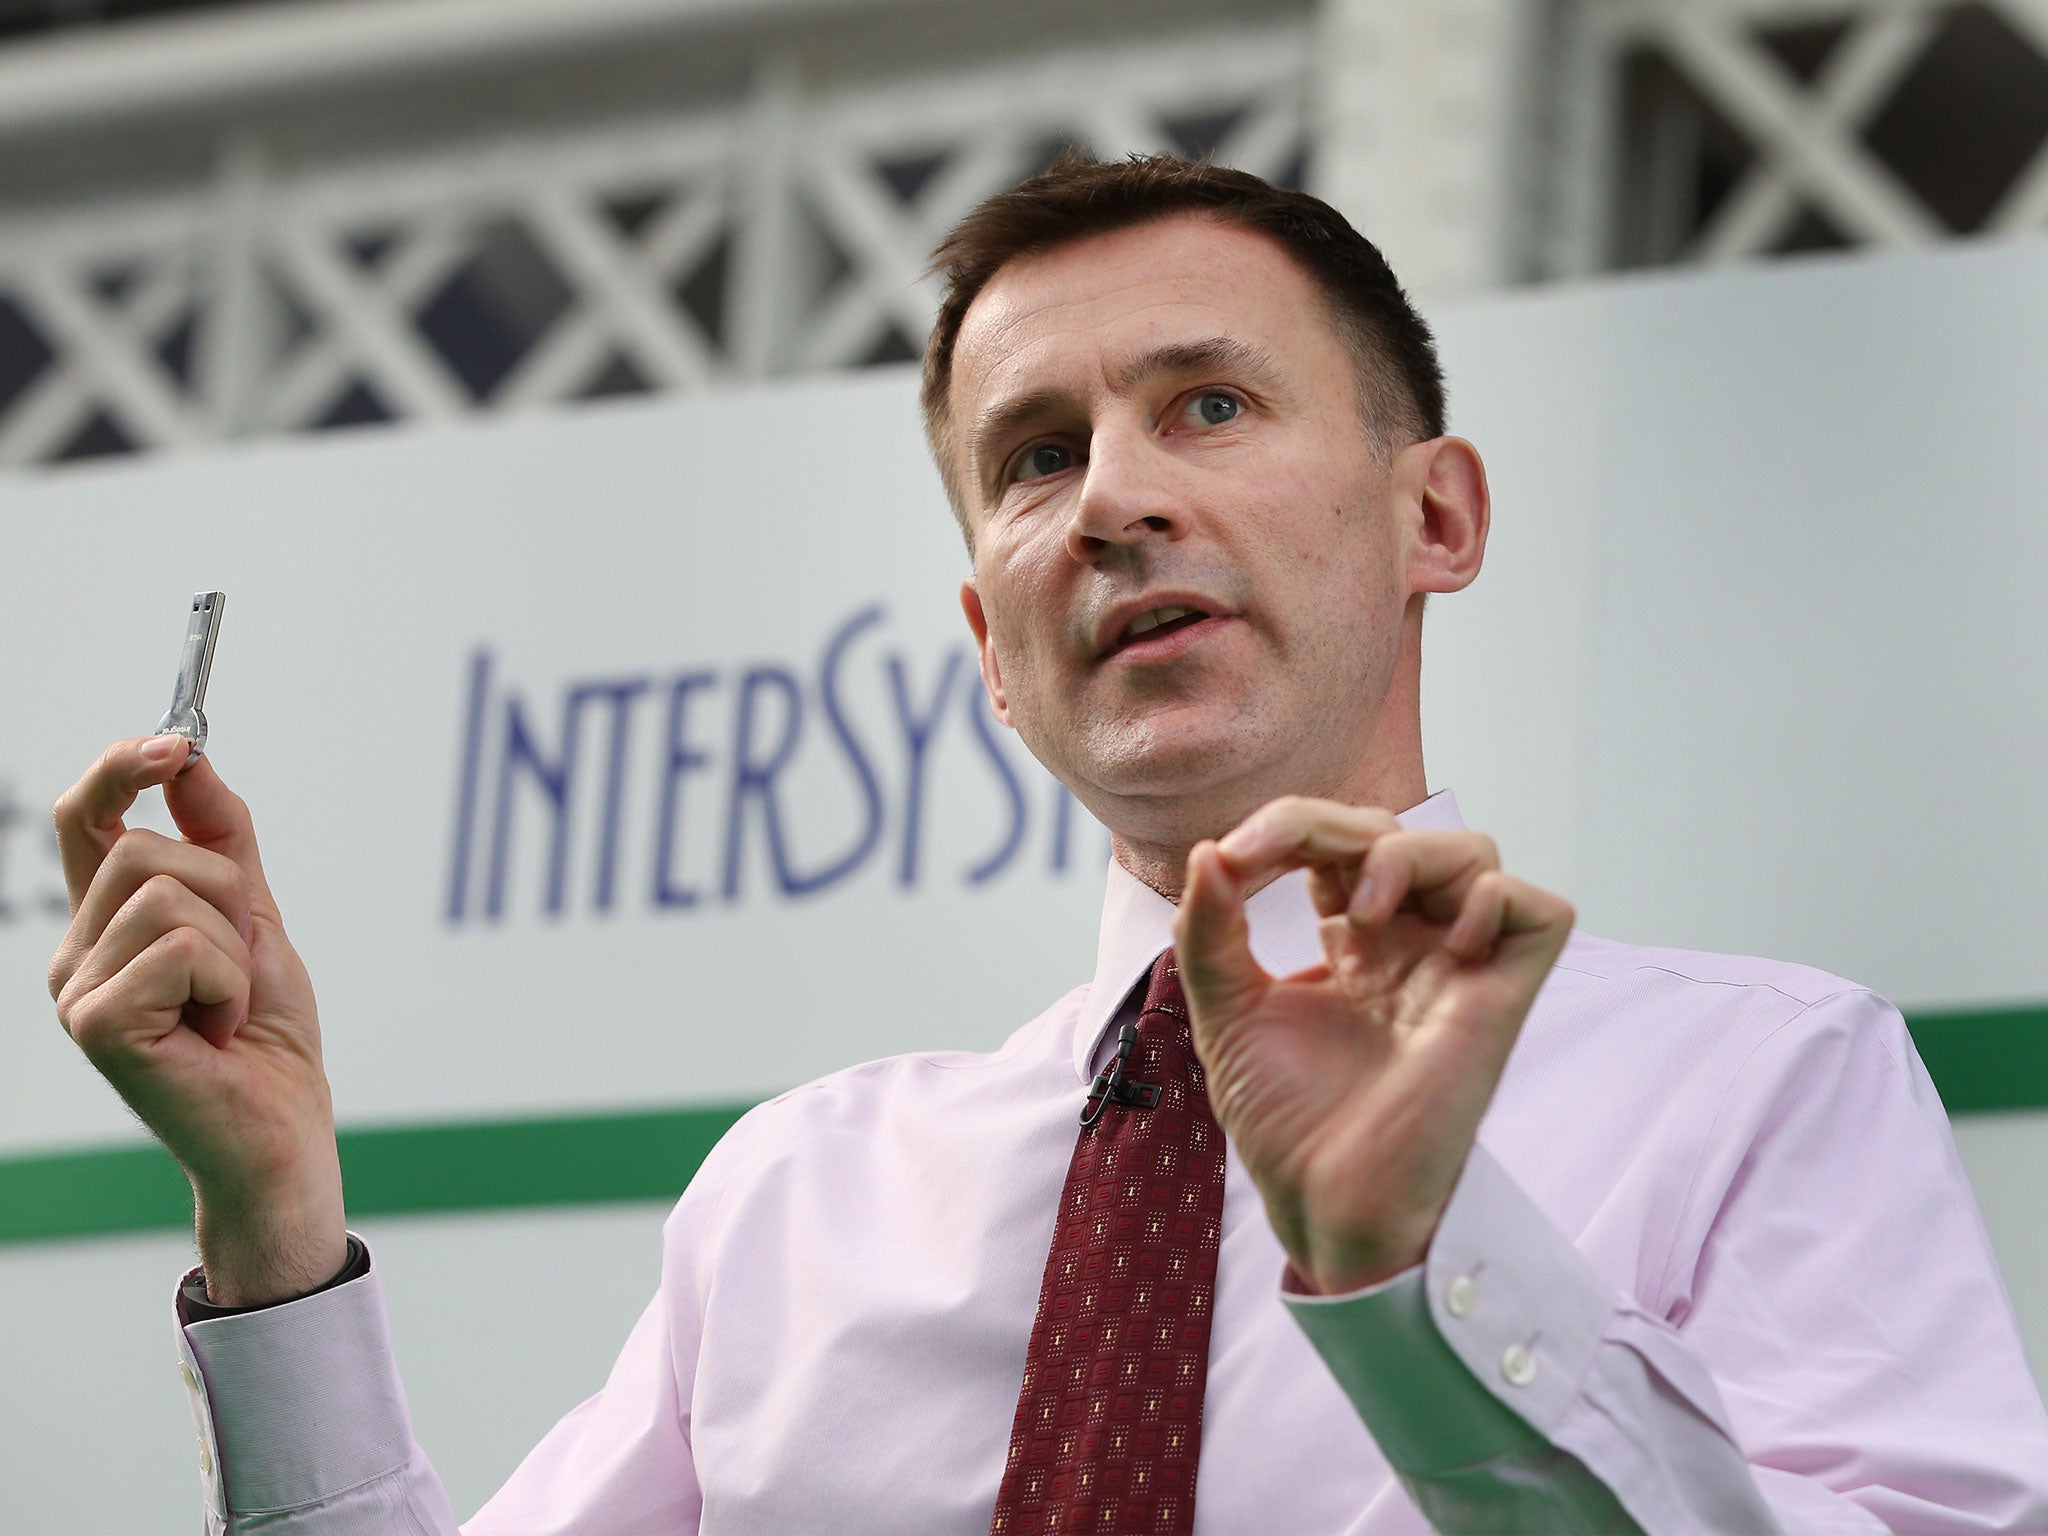 Jeremy Hunt believes politicians should connect with voters 'the old-fashioned way'